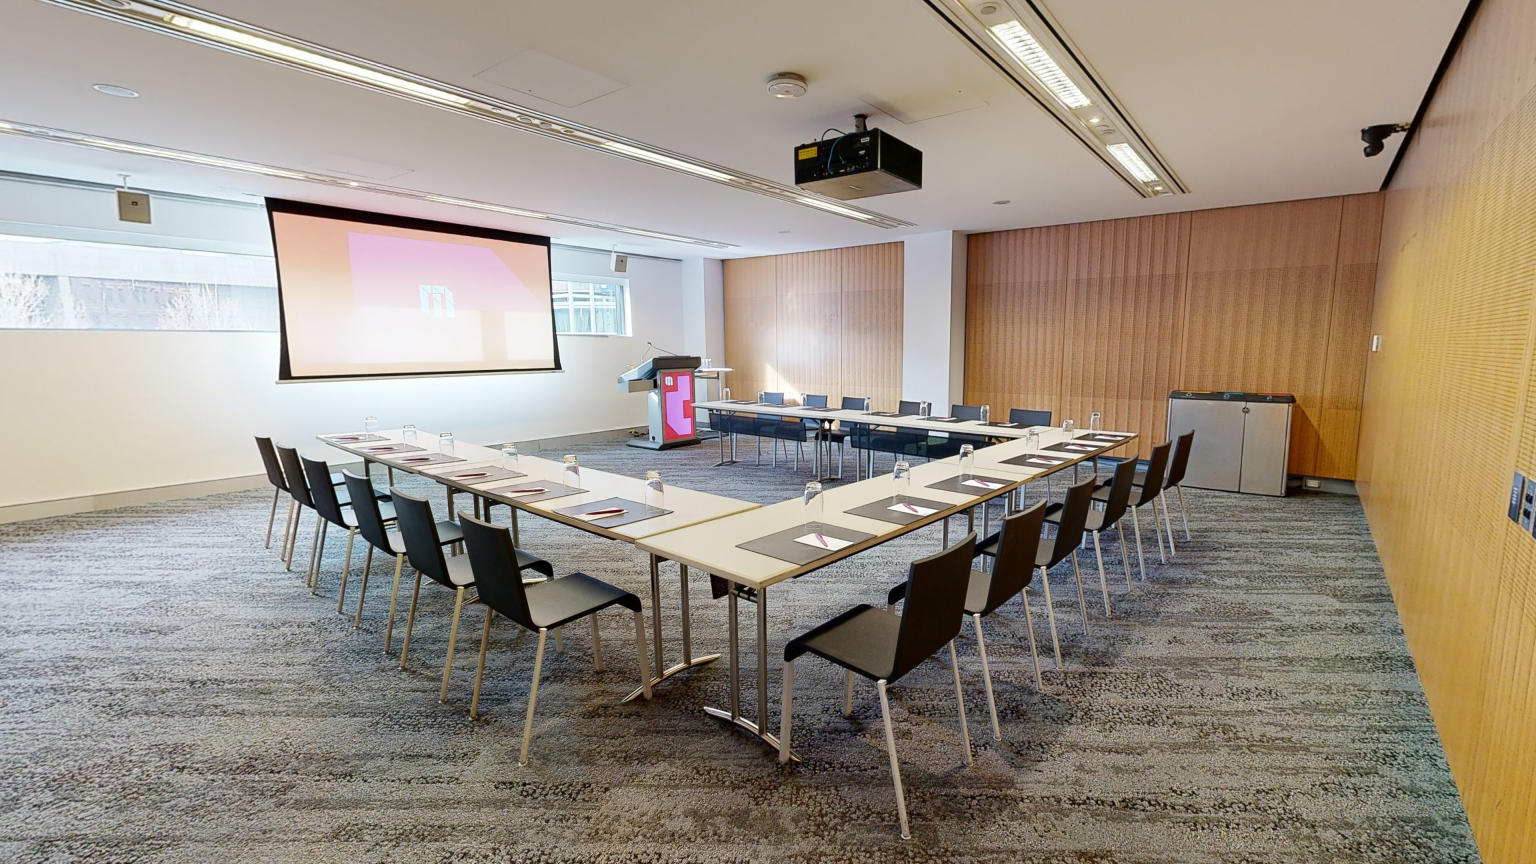 A meeting or conference room with tables and chairs arranged in a u-shaped boardroom configuration. The tables and chairs are facing a large projector screen and lectern both which have MCEC branding displayed on it. 